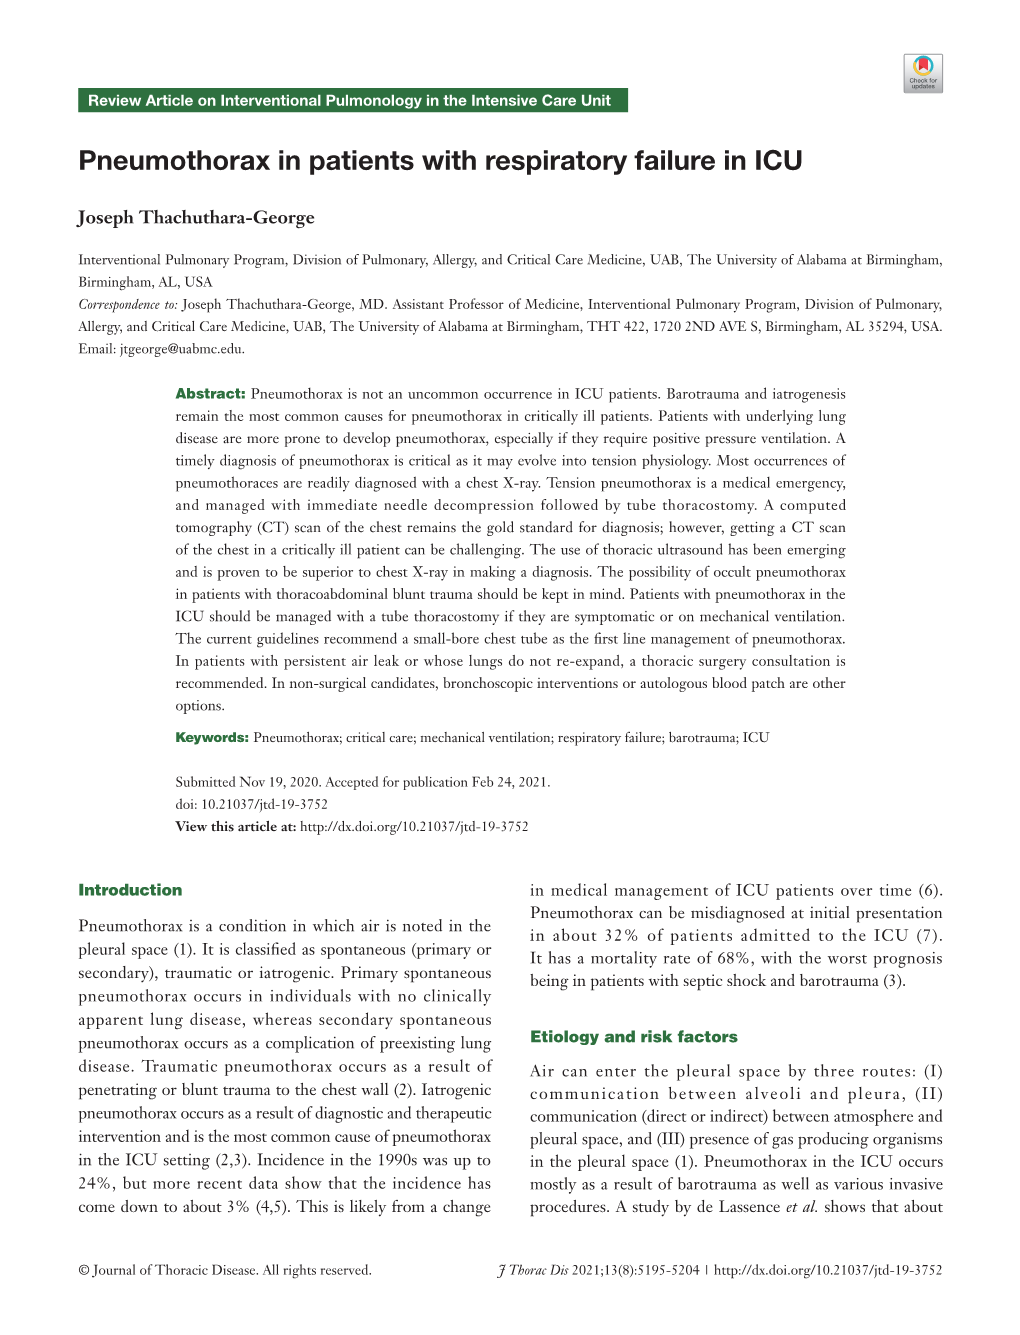 Pneumothorax in Patients with Respiratory Failure in ICU